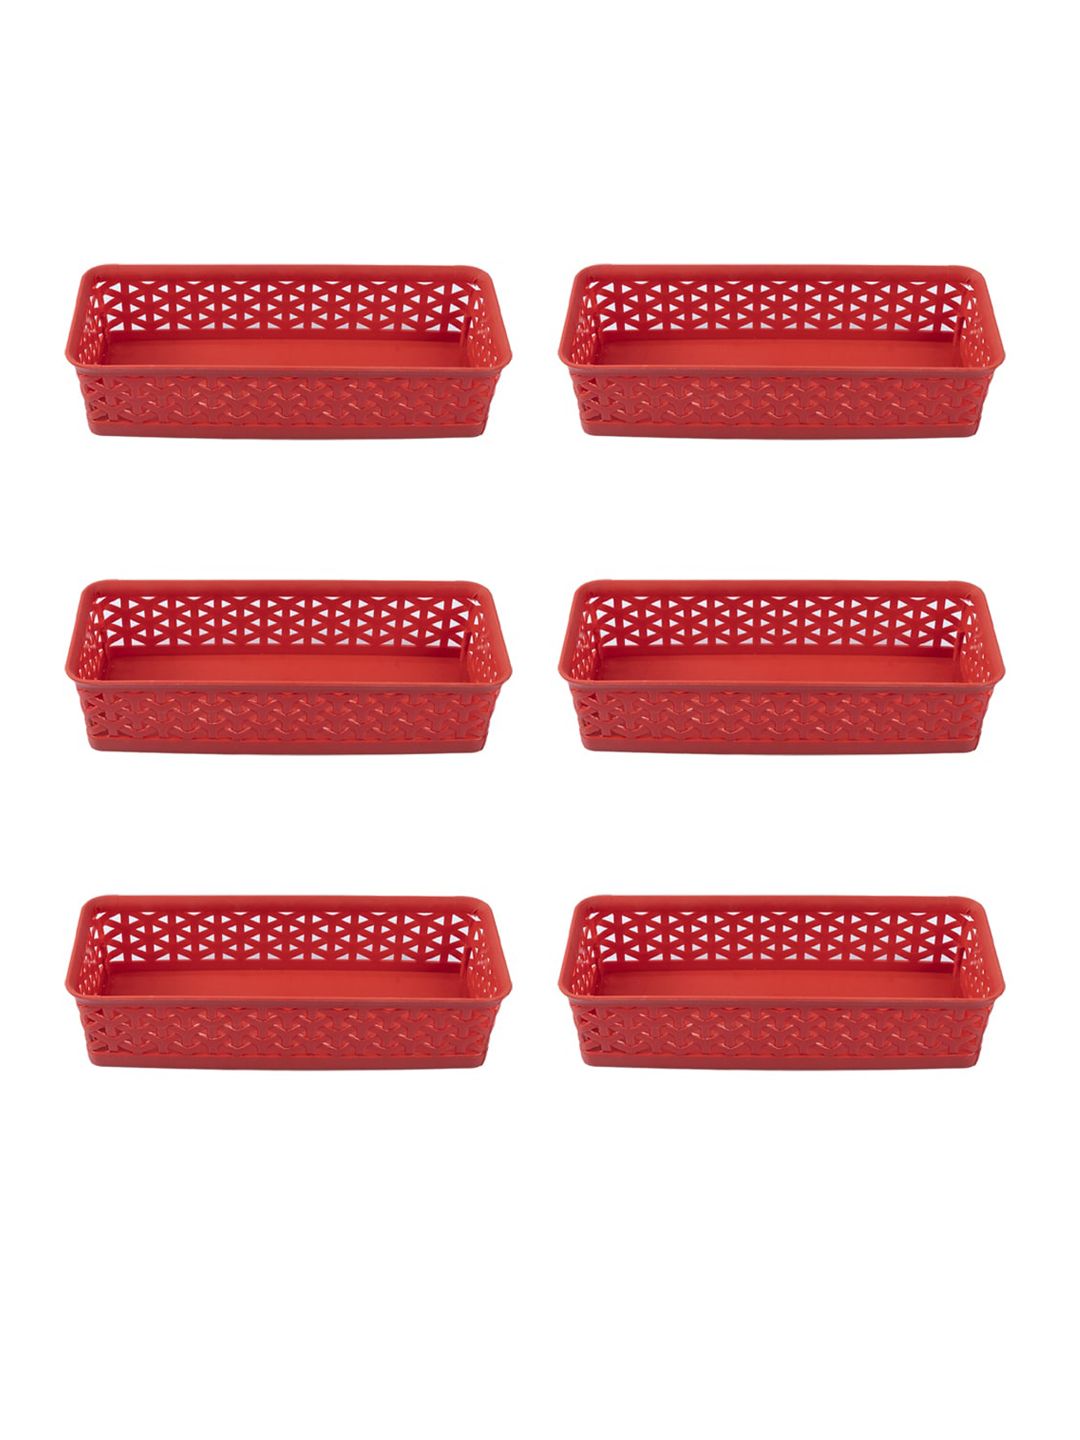 MARKET99 Set Of 6 Red Textured Plastic Basket Price in India